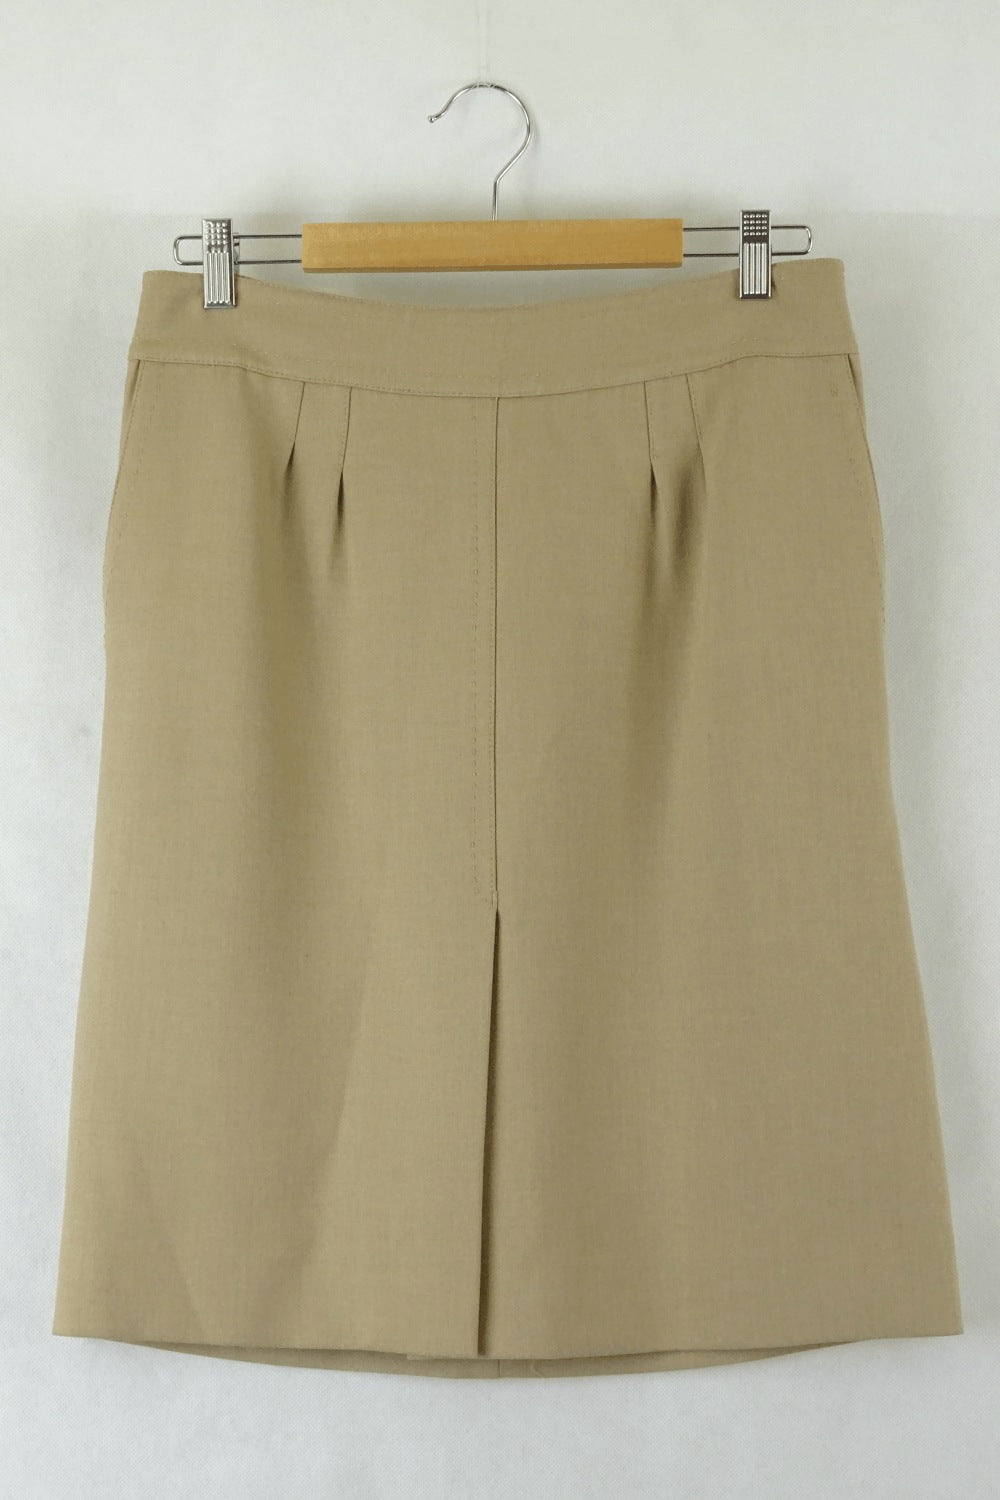 Country Road Brown Skirt 10